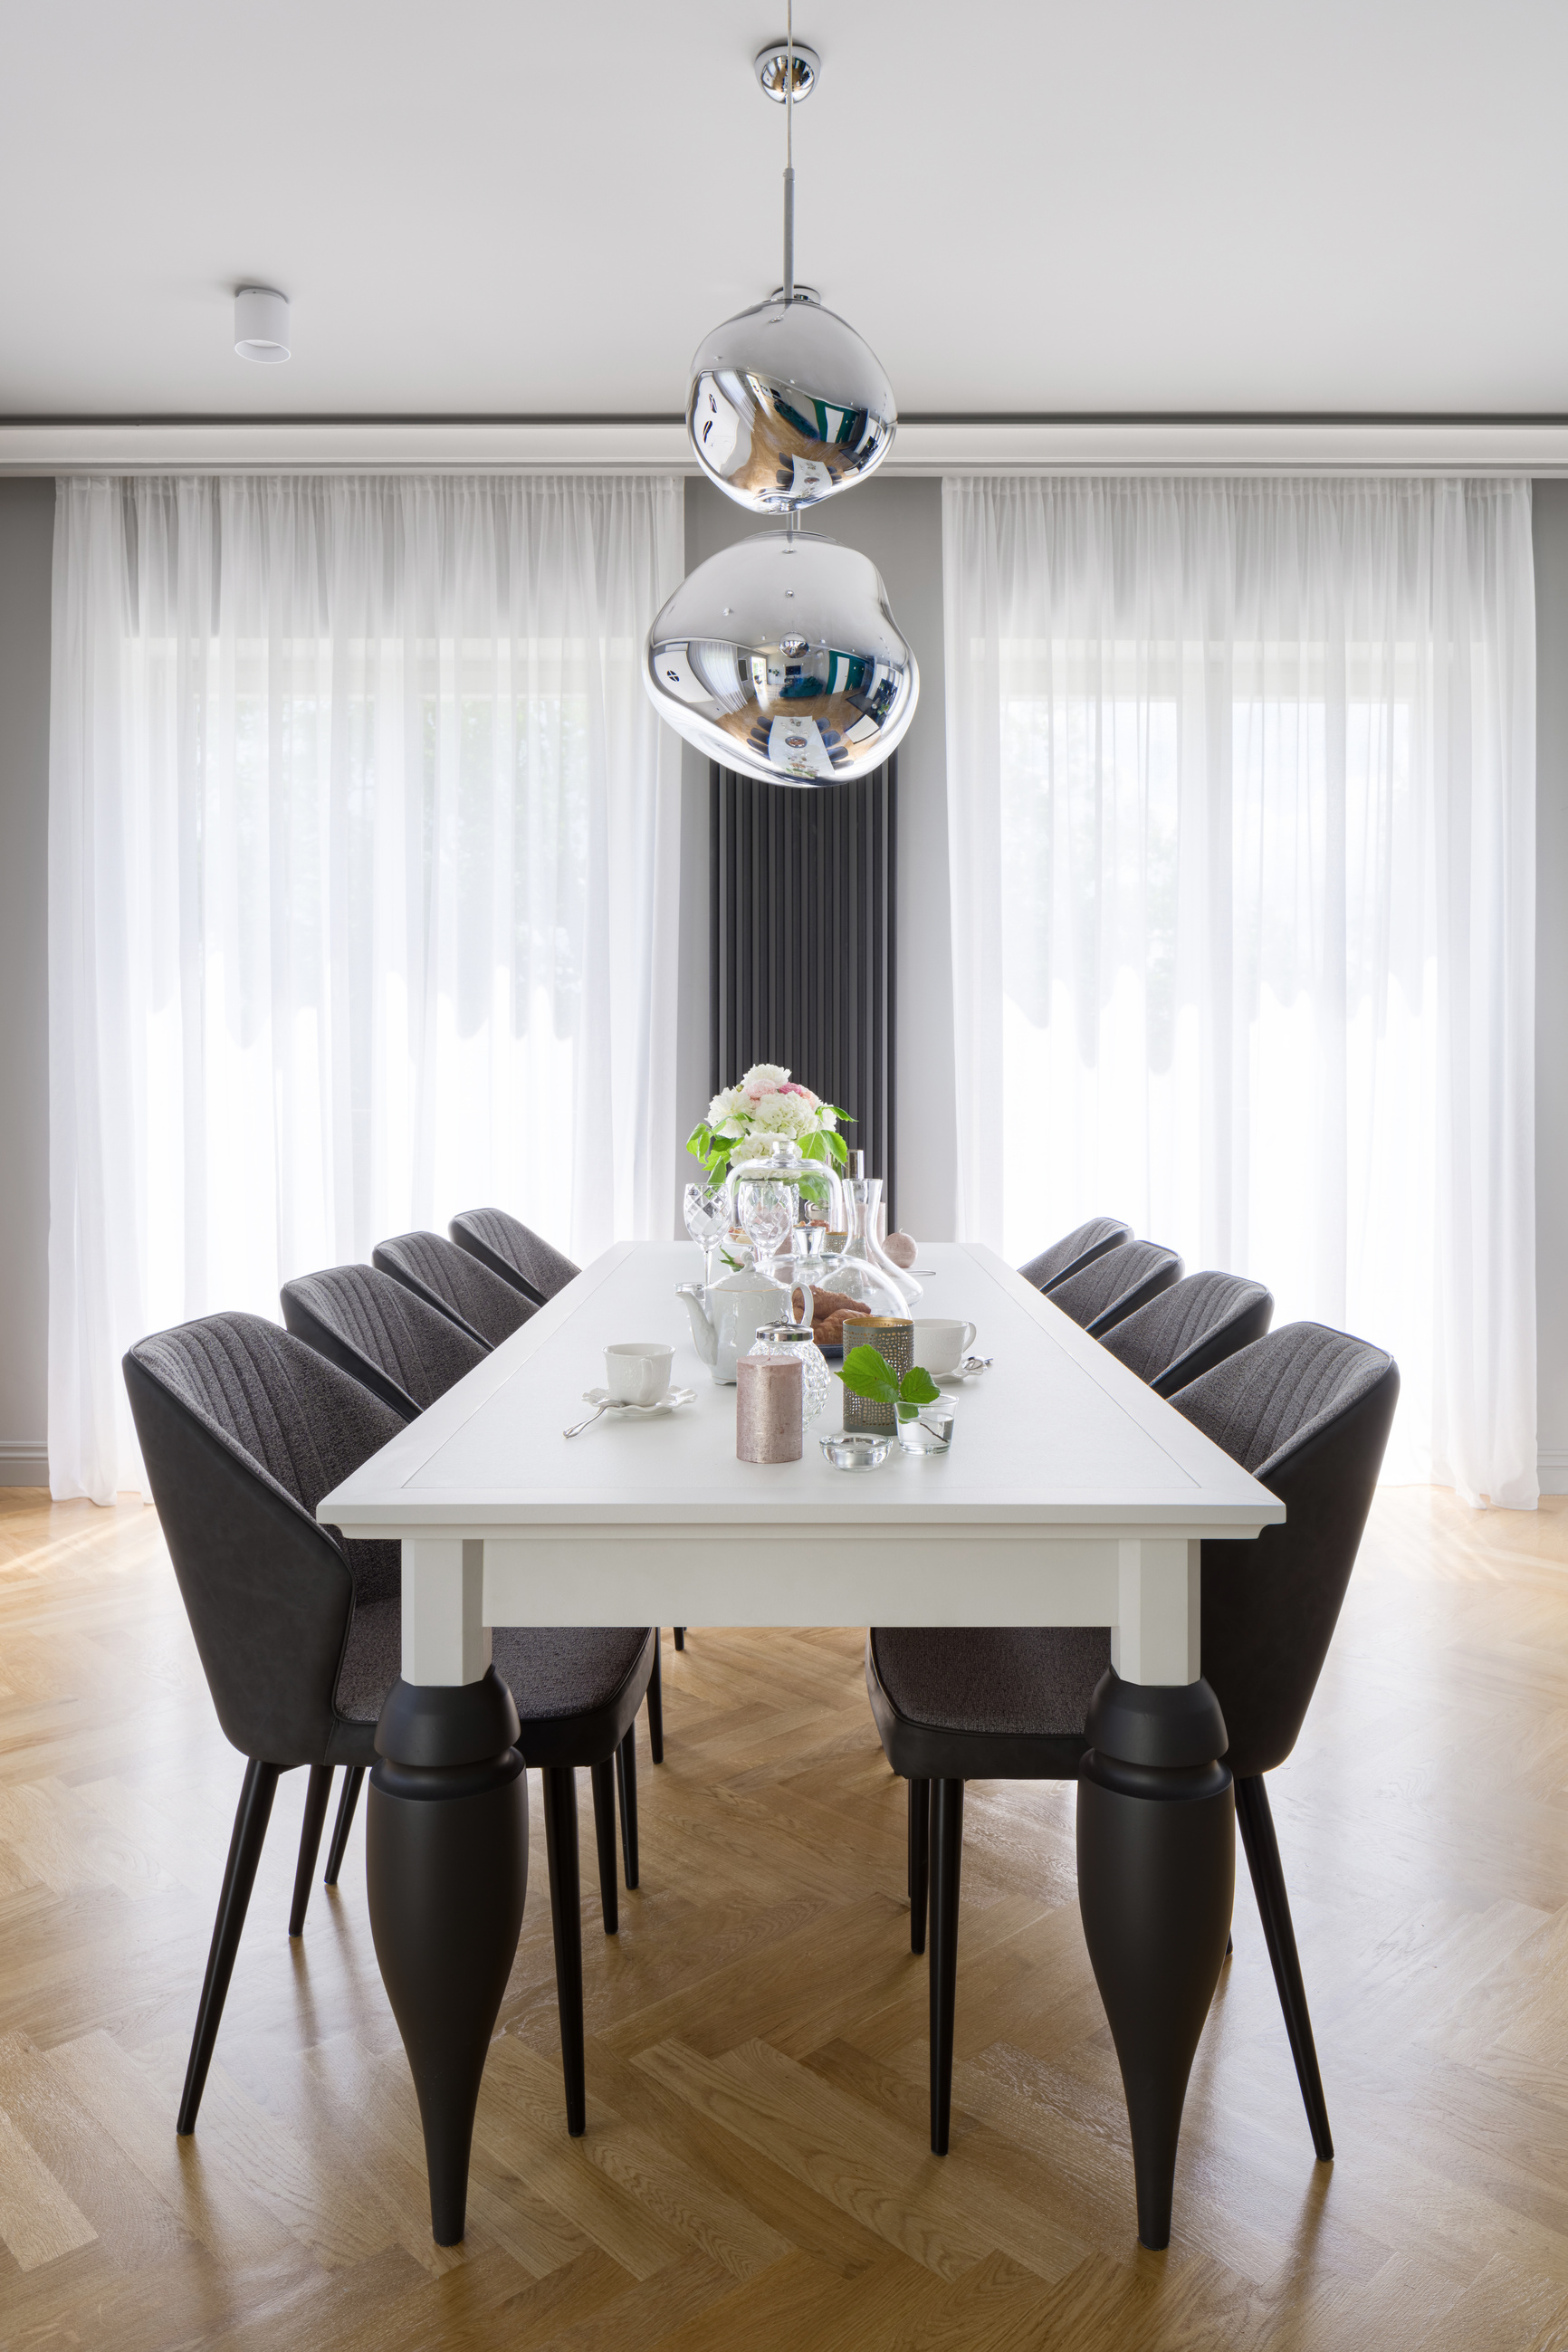 Fancy dining table with elegant chairs